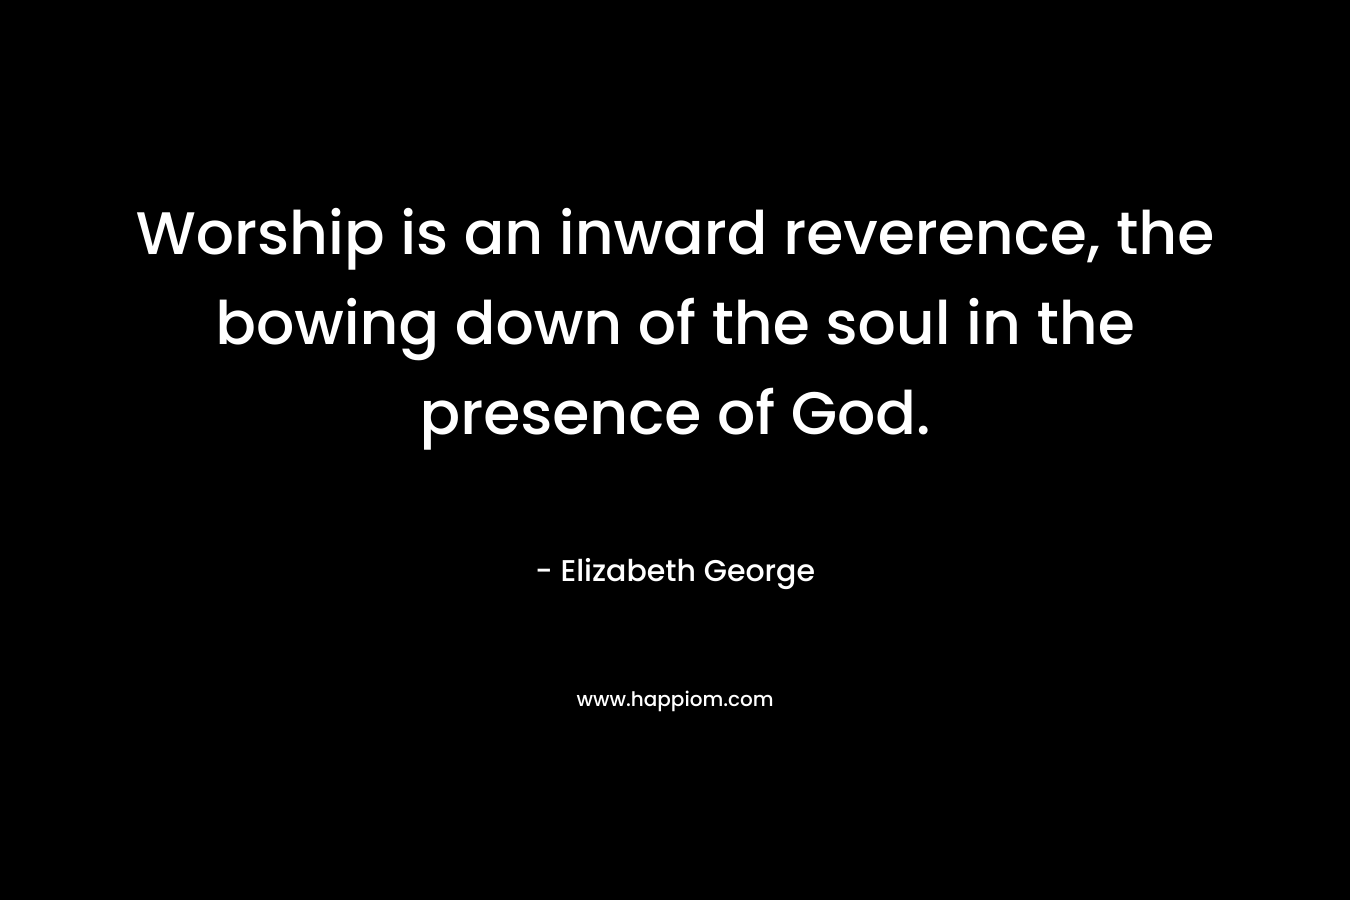 Worship is an inward reverence, the bowing down of the soul in the presence of God.